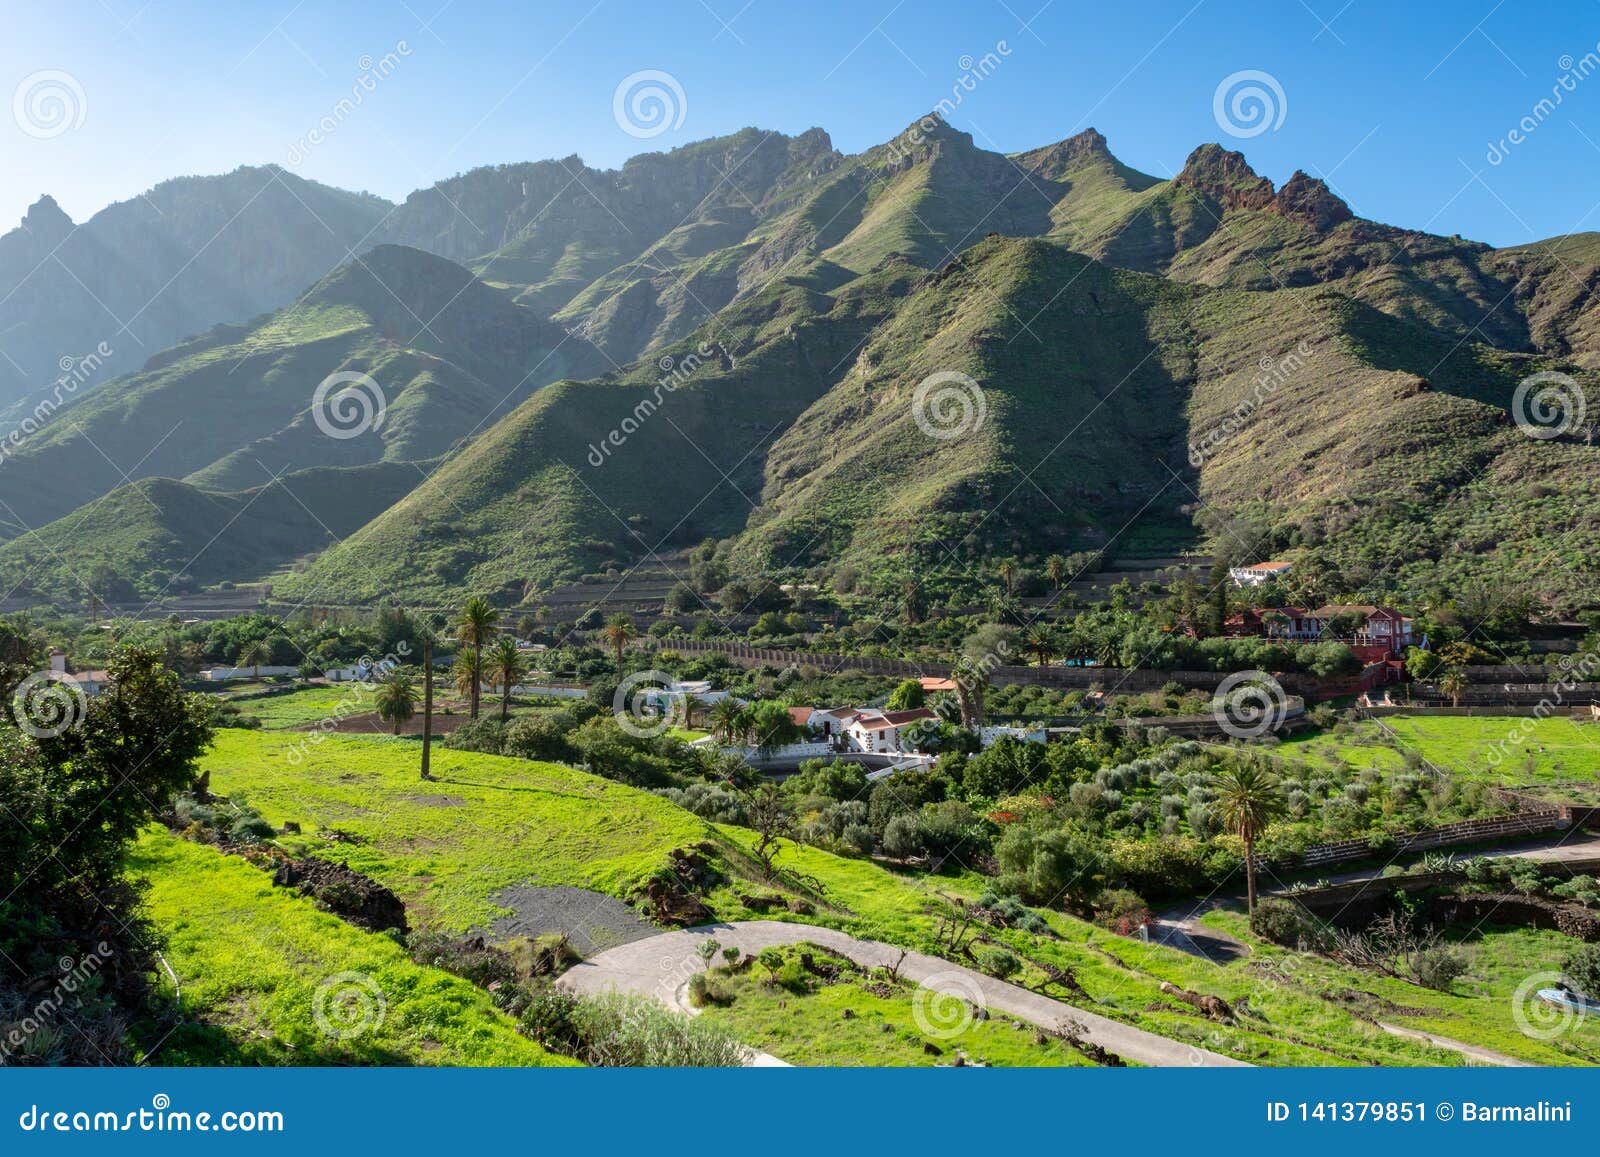 fertile valley with mango and oranges fruit plantations, vineyards and avocados orchards near agaete, gran canaria, canary islands